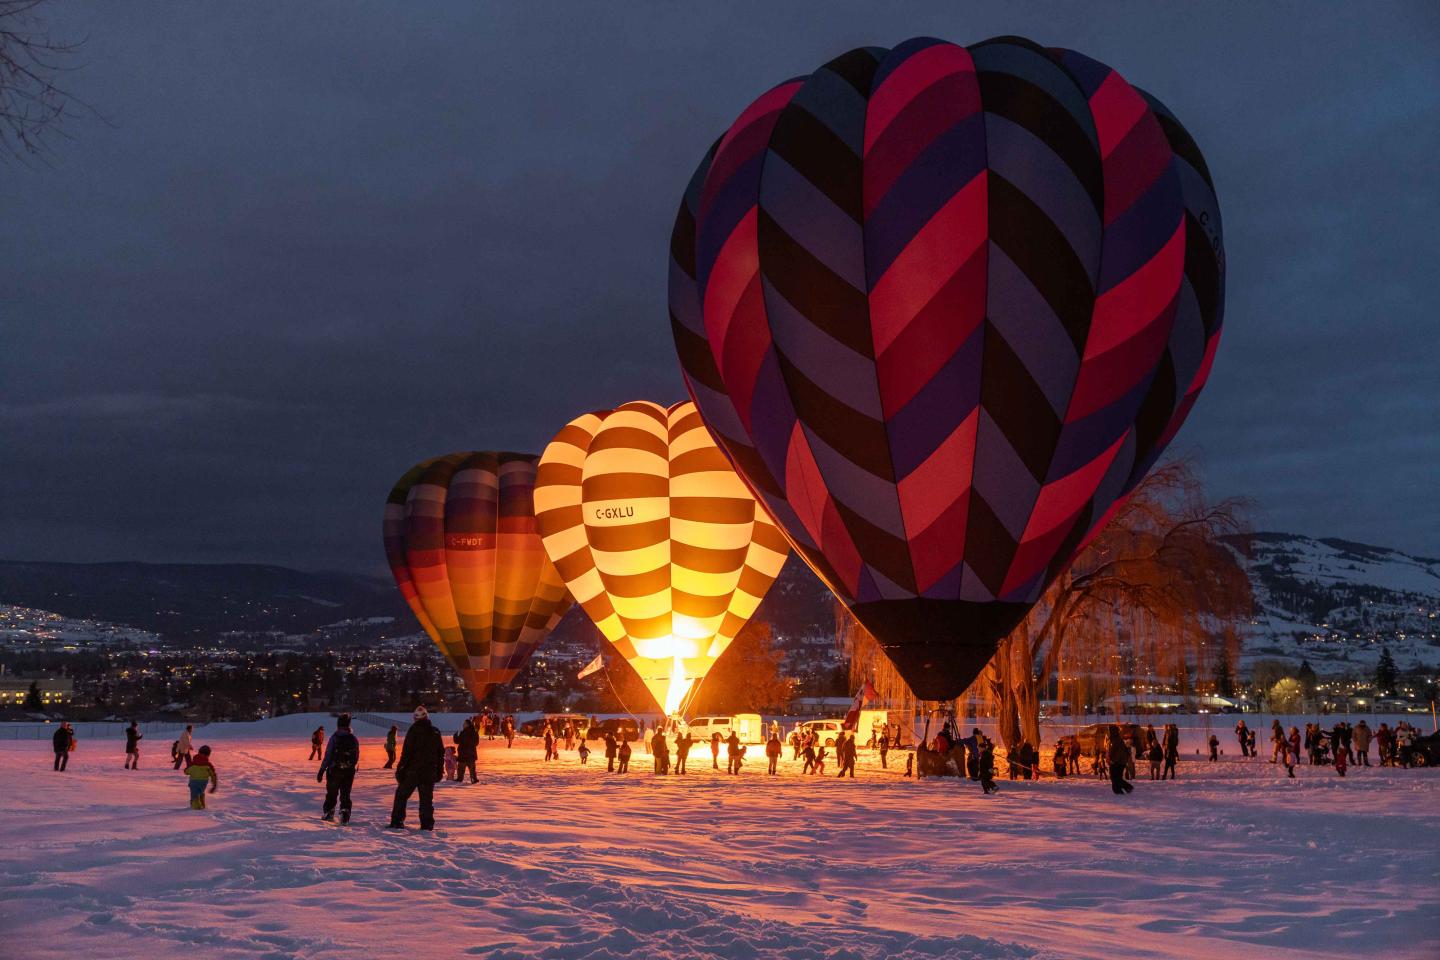 Hot air balloons in snow